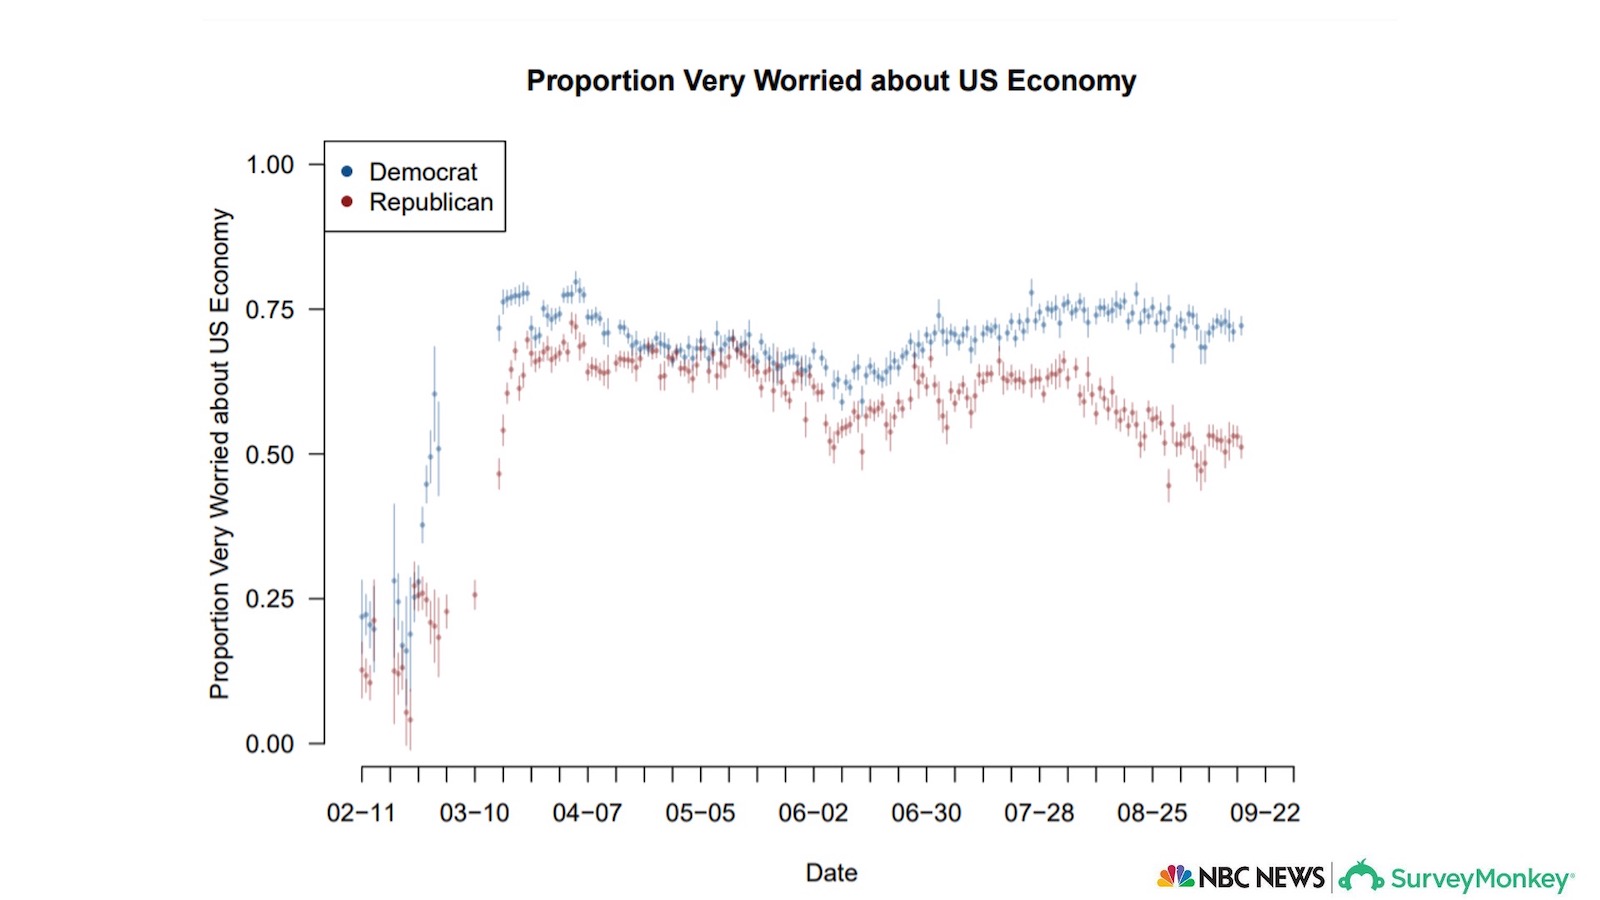 Proportion very worried about US Economy